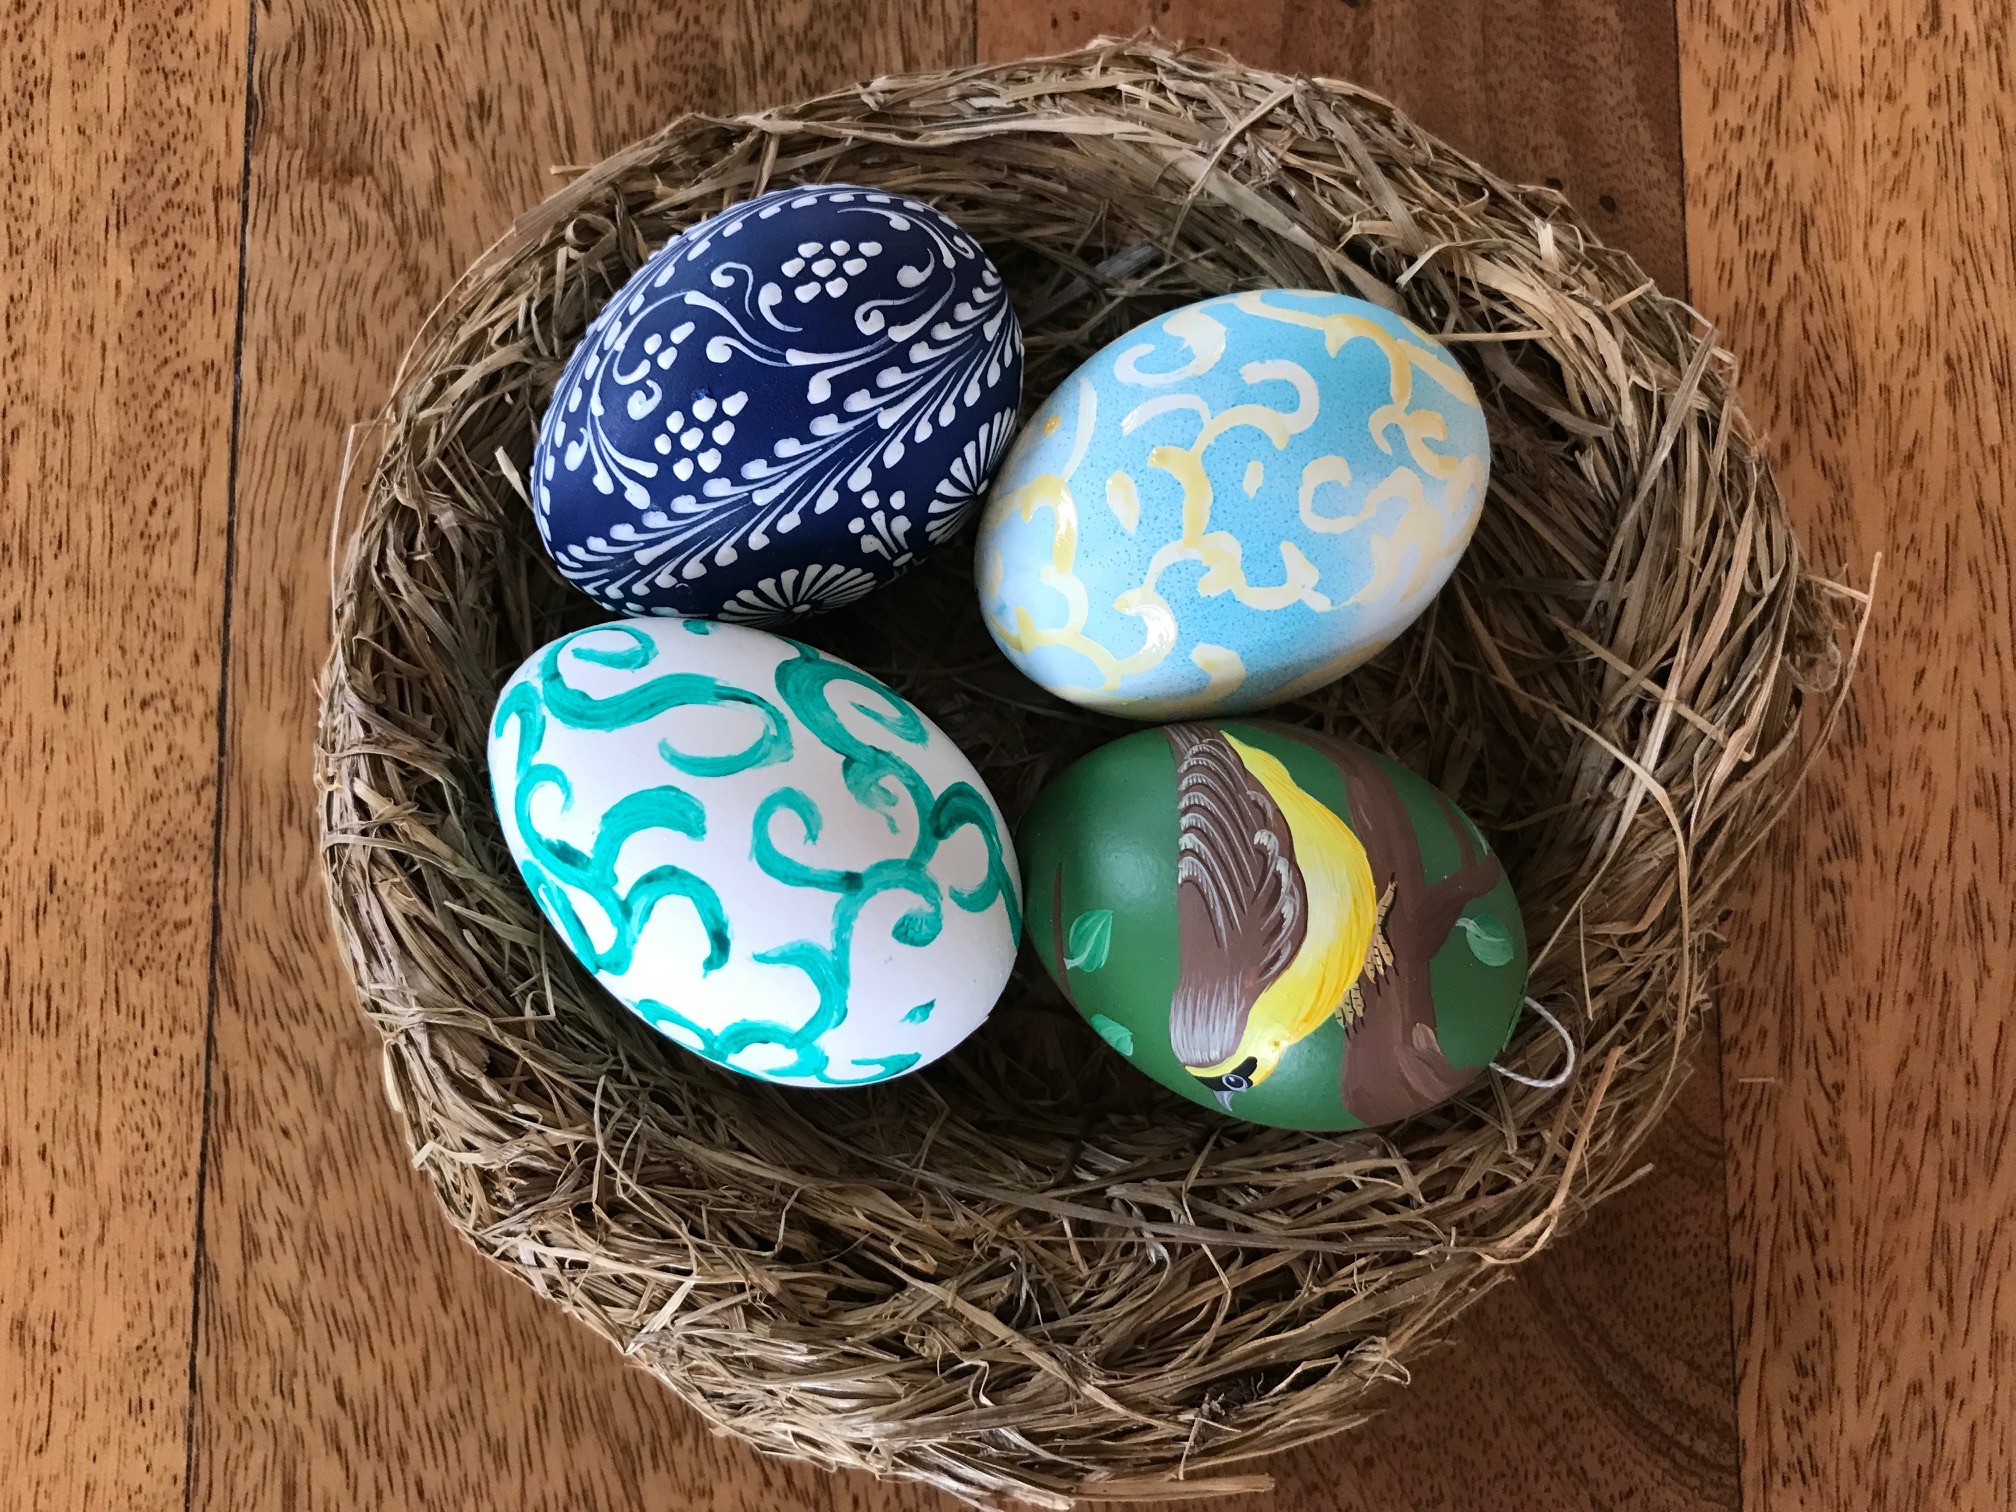 Bring out the Easter eggs – the kids are coming home